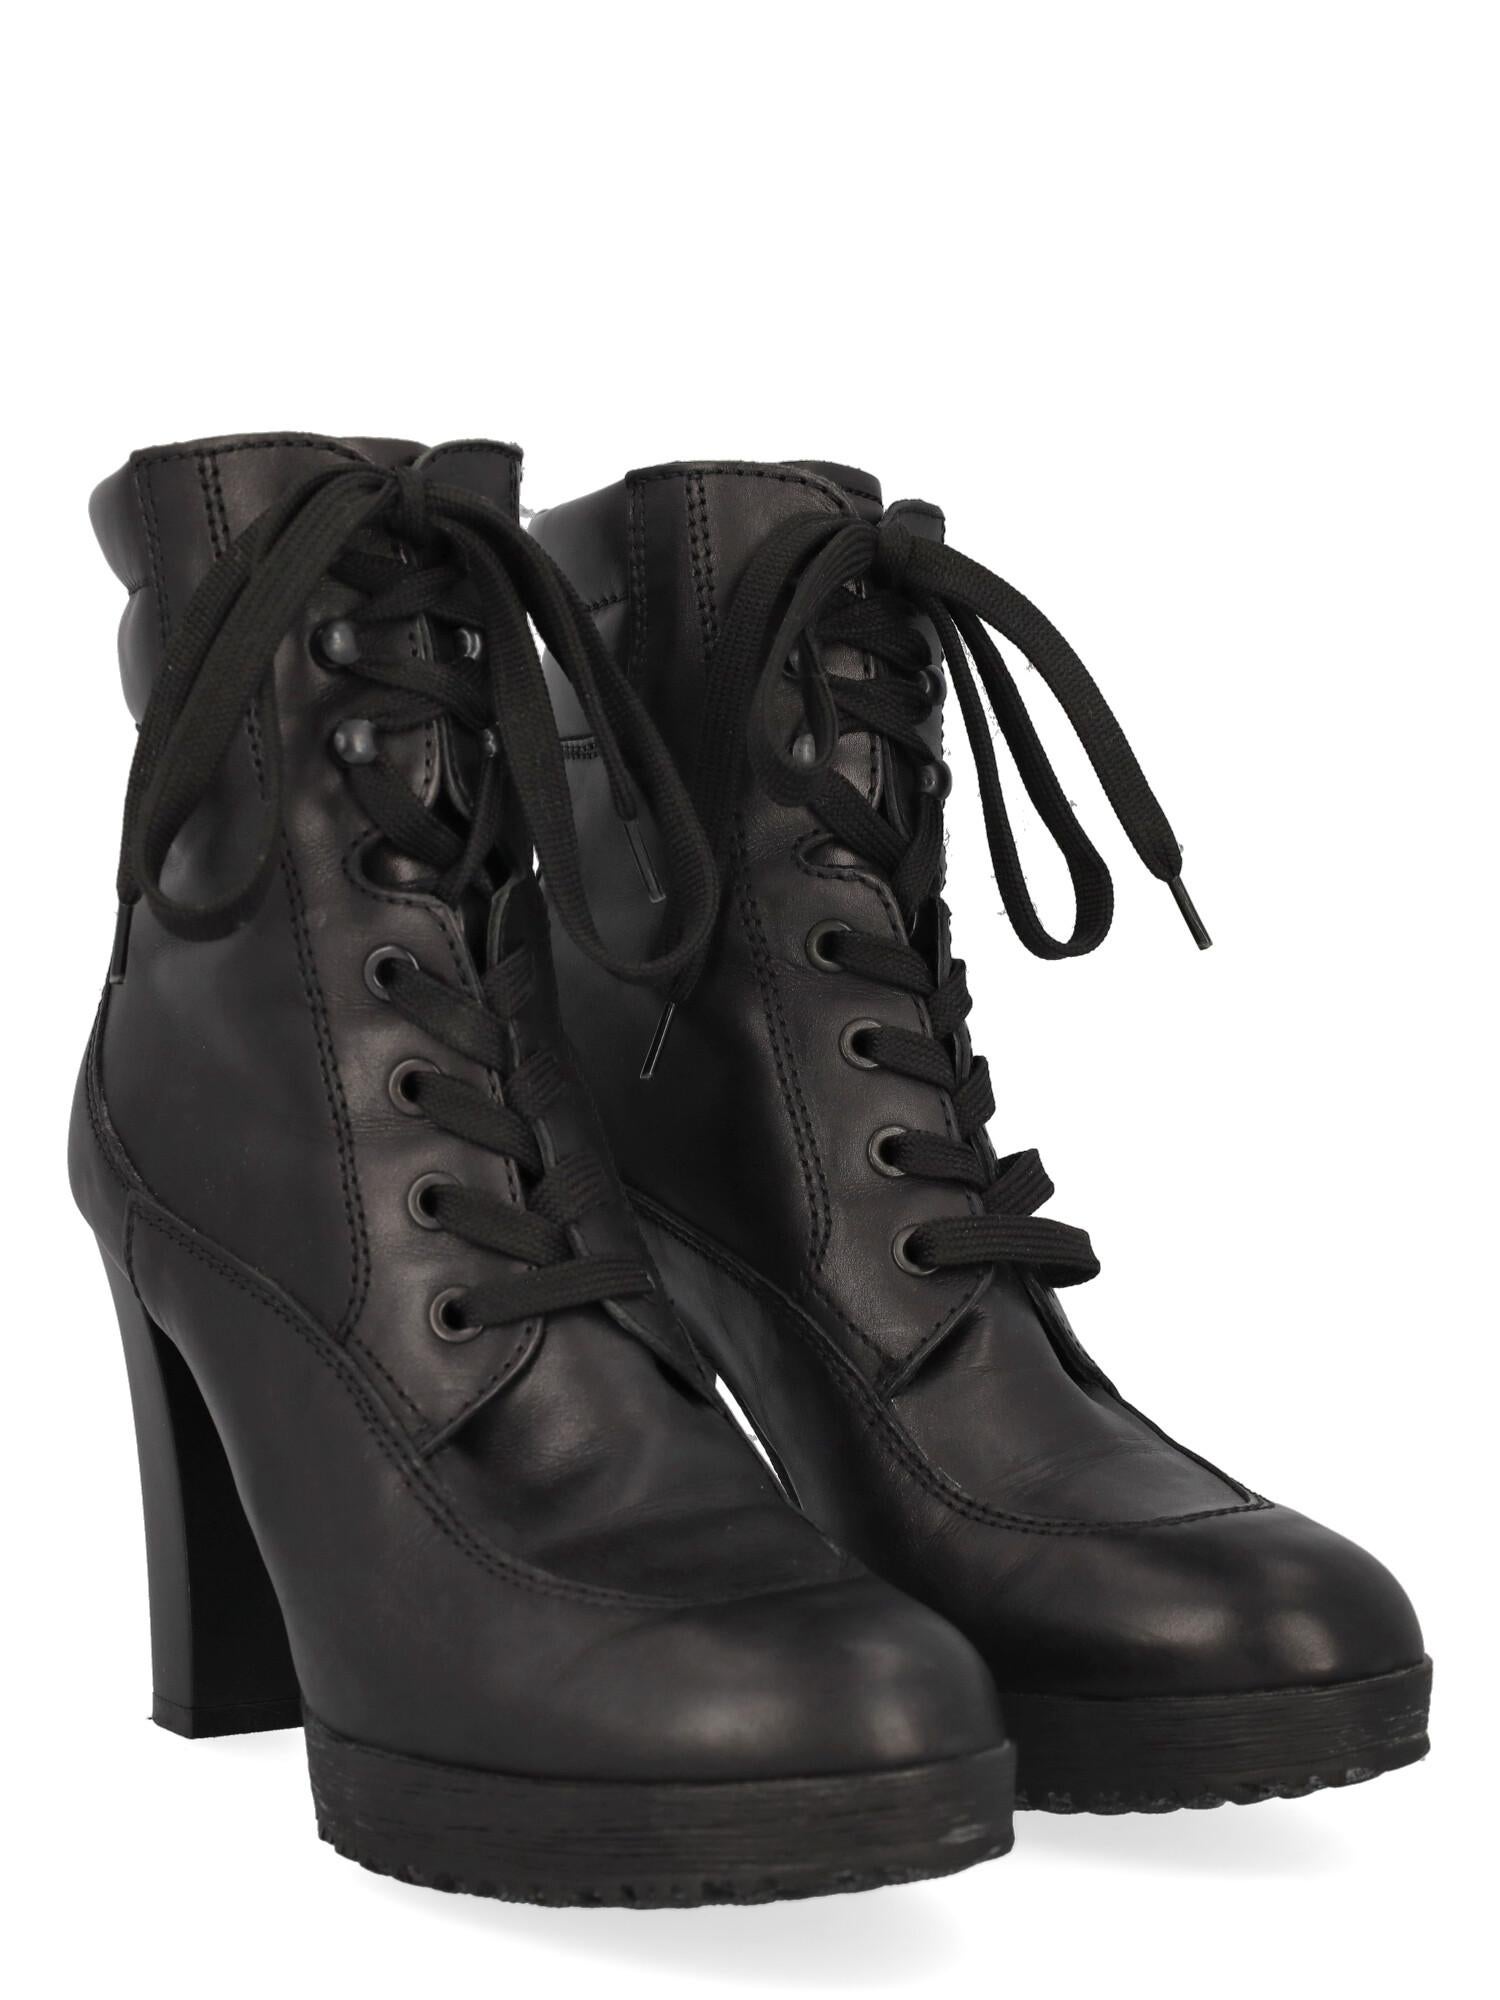 Product Description: Ankle boots, leather, solid color, lace-up, round toe, branded insole, tapered heel, high heel

Includes: N/A

Product Condition: Very Good
Sole: visible signs of use. Upper: visible signs. Insole: negligible generic